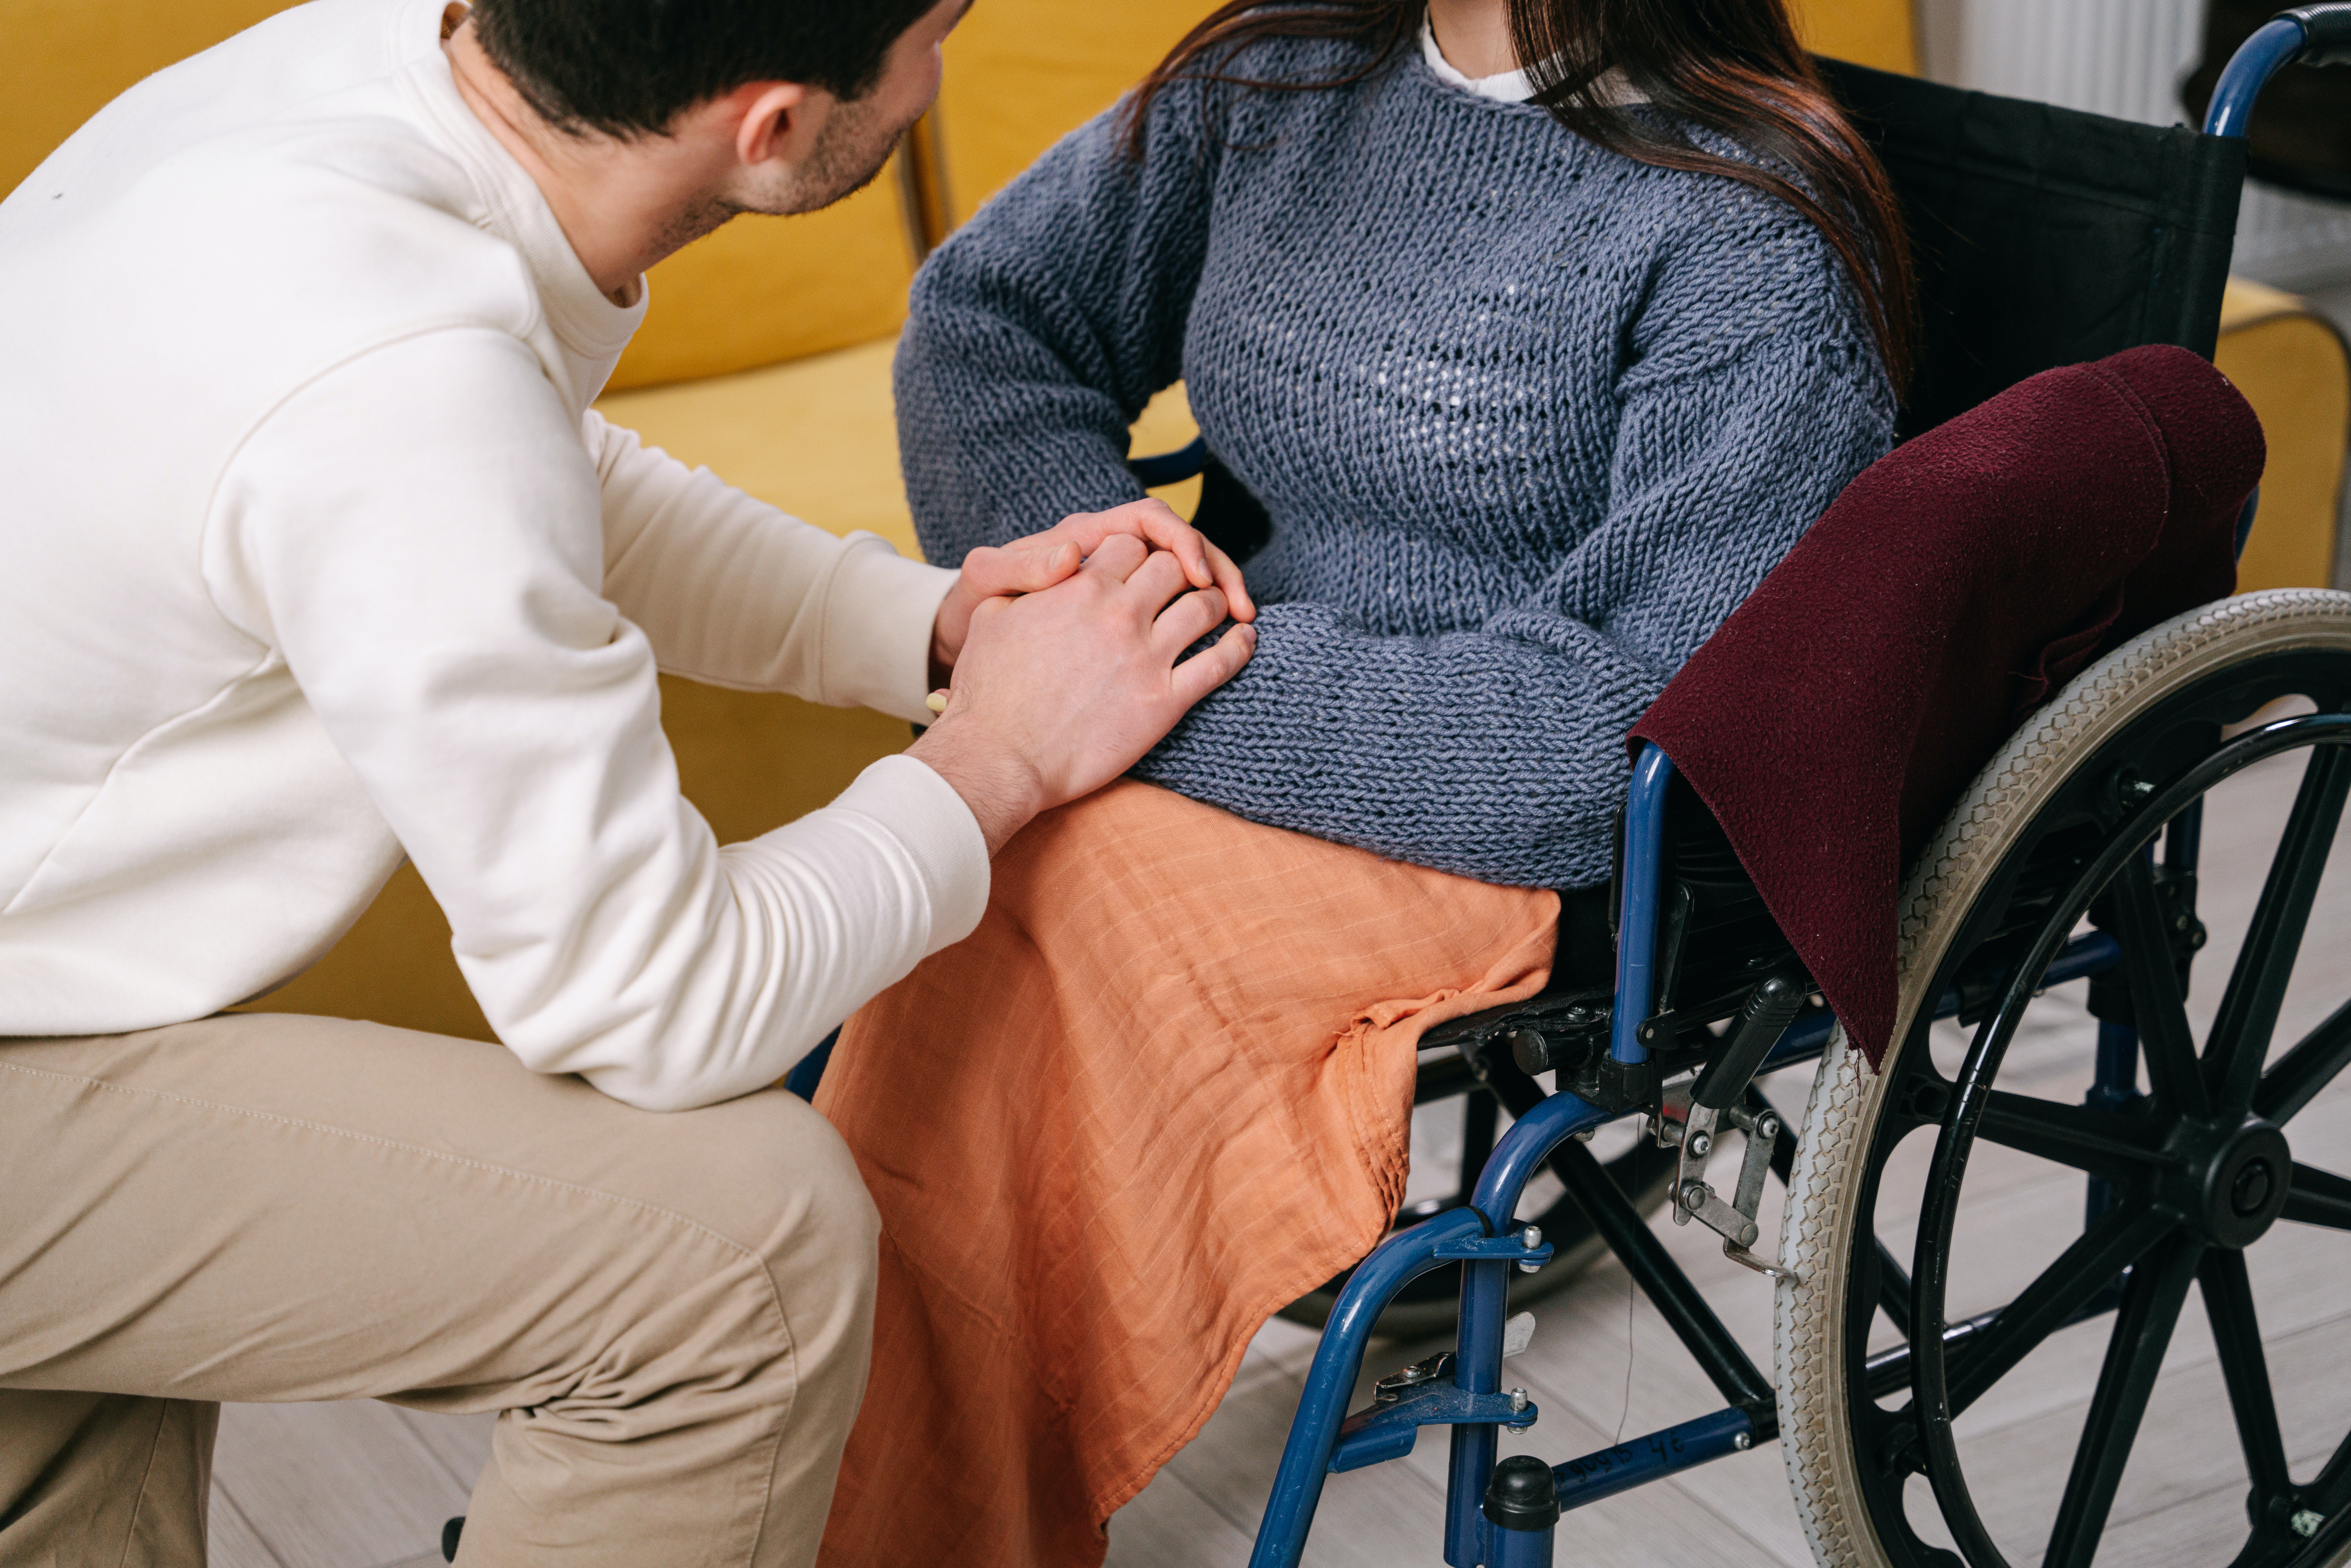 A caregiver shows his support to a woman in wheelchair